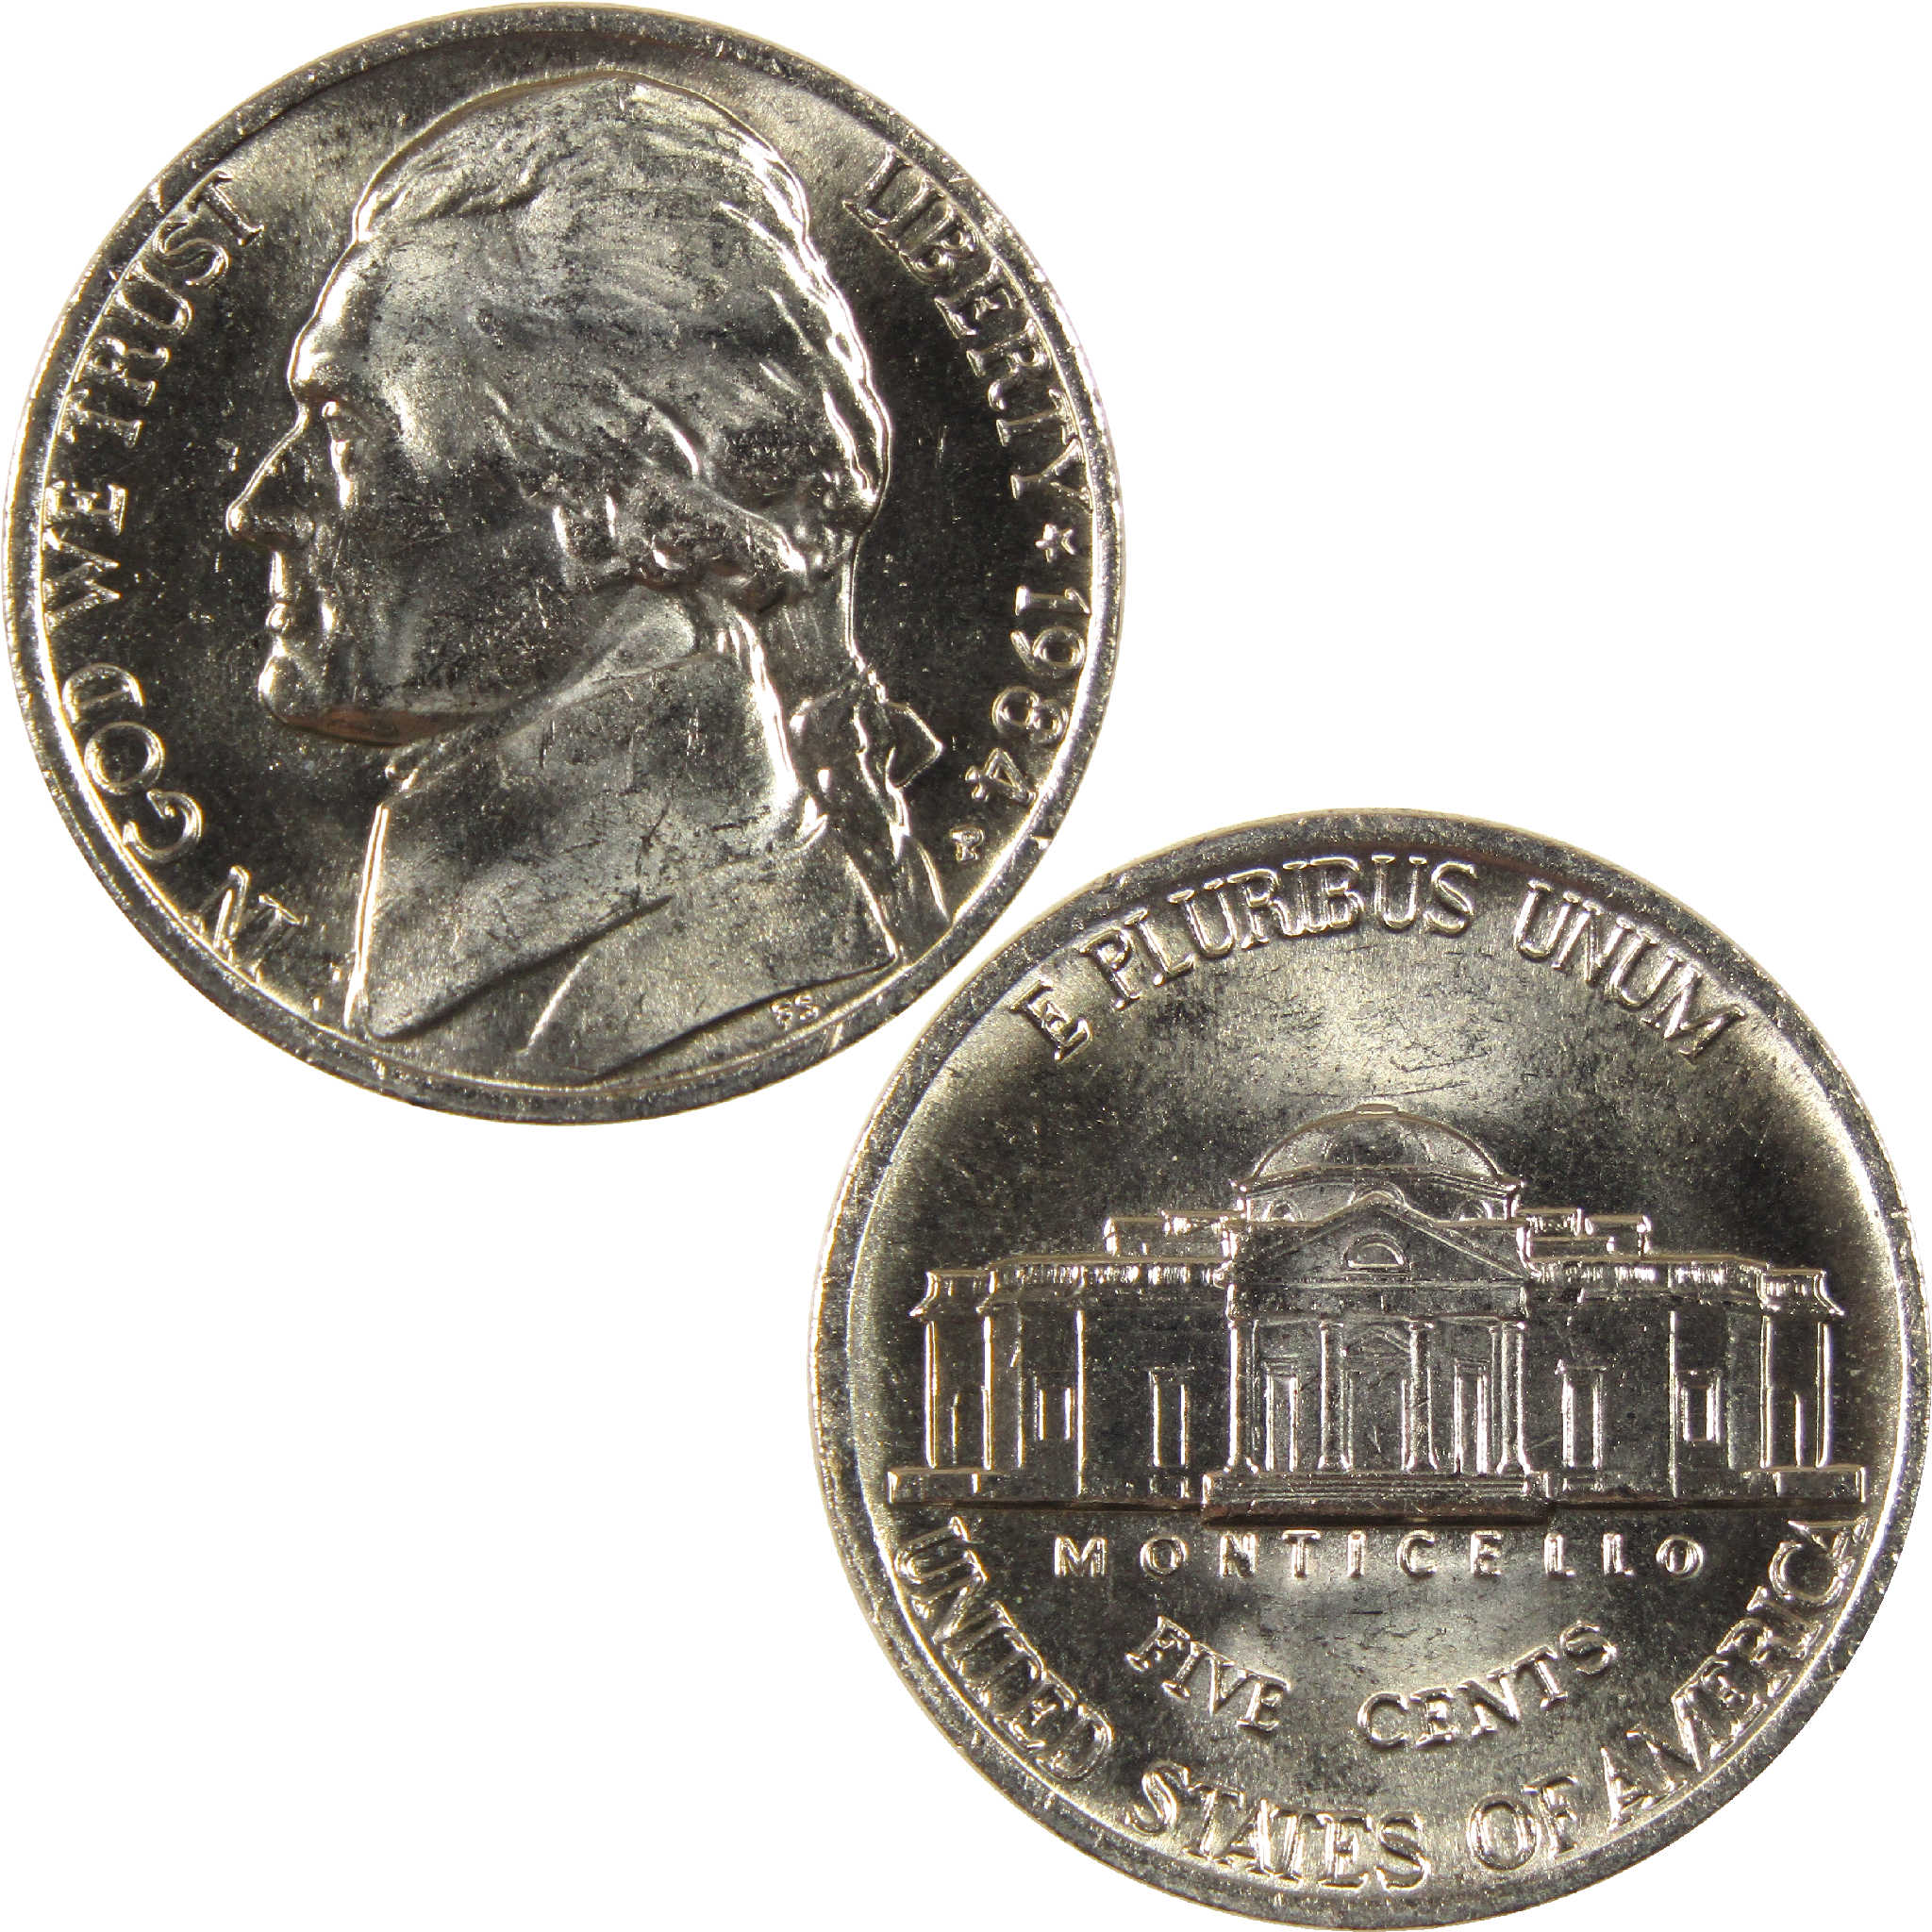 1984 P Jefferson Nickel Uncirculated 5c Coin